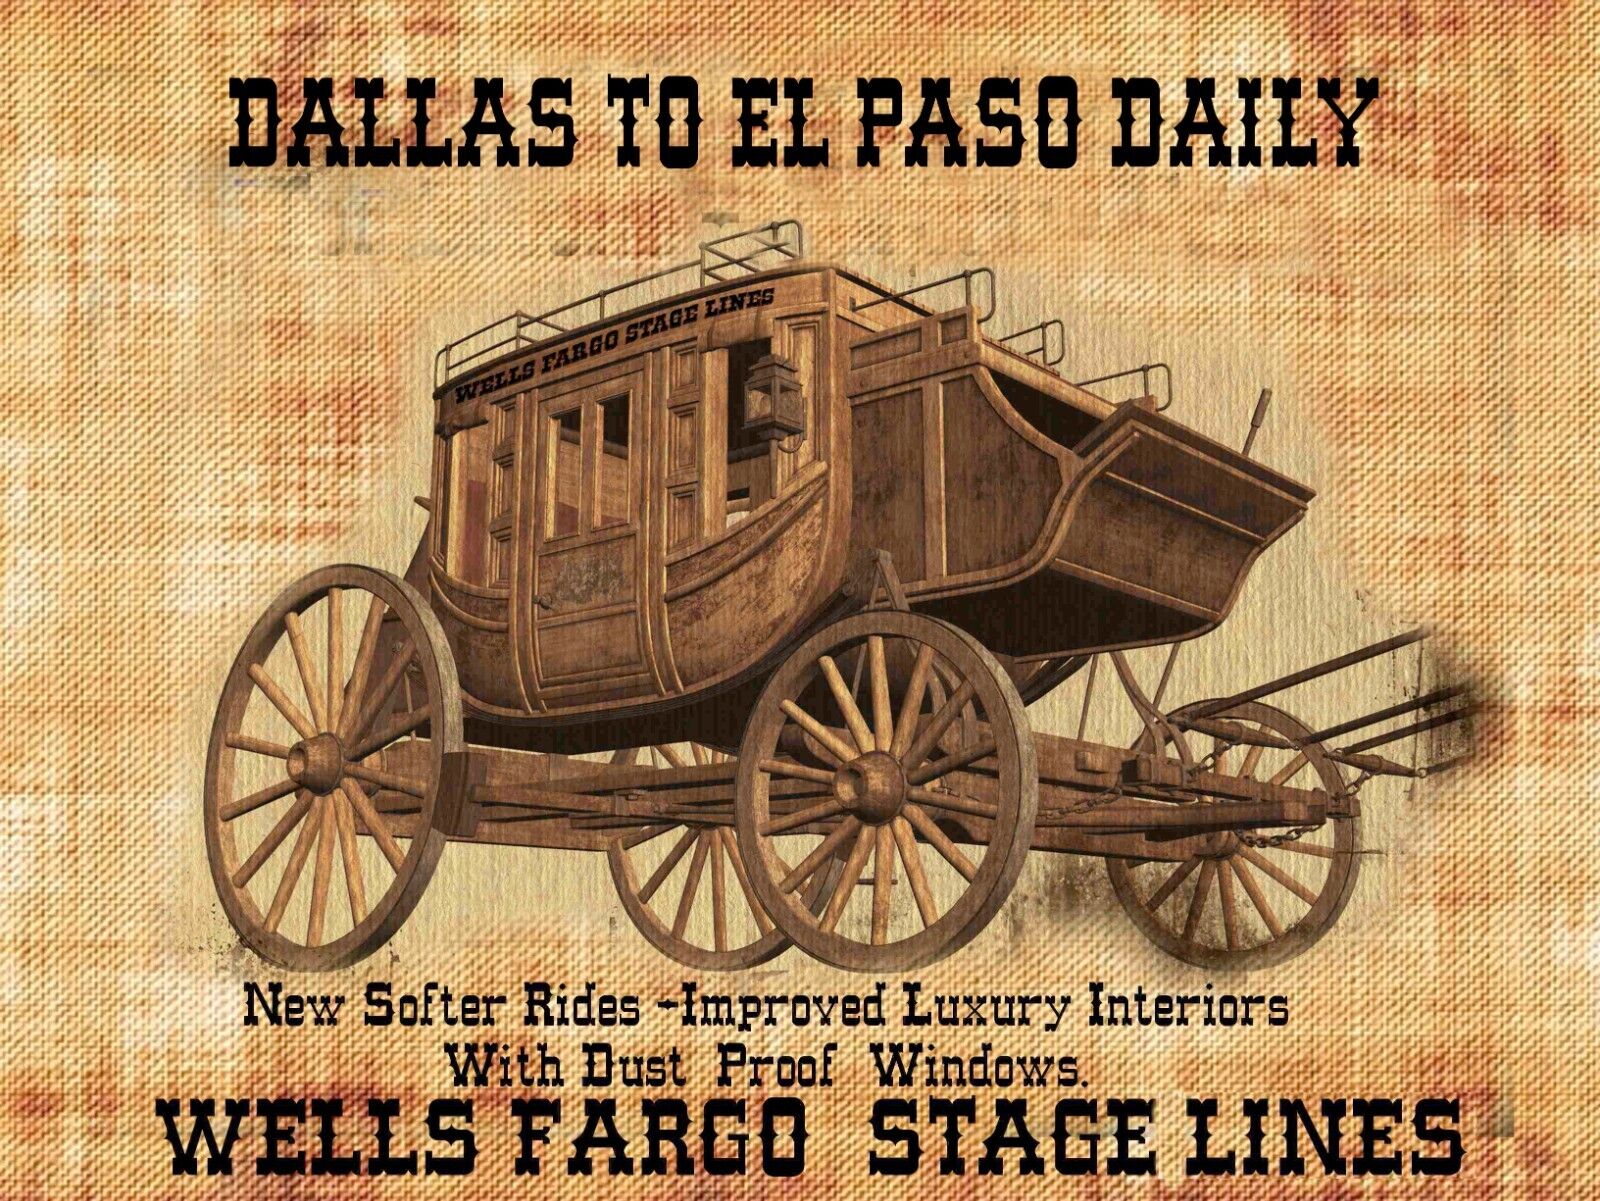 Old West Wells Fargo Stage lines Dallas To El Paso  Mouse Pad   7 3/4  x 9